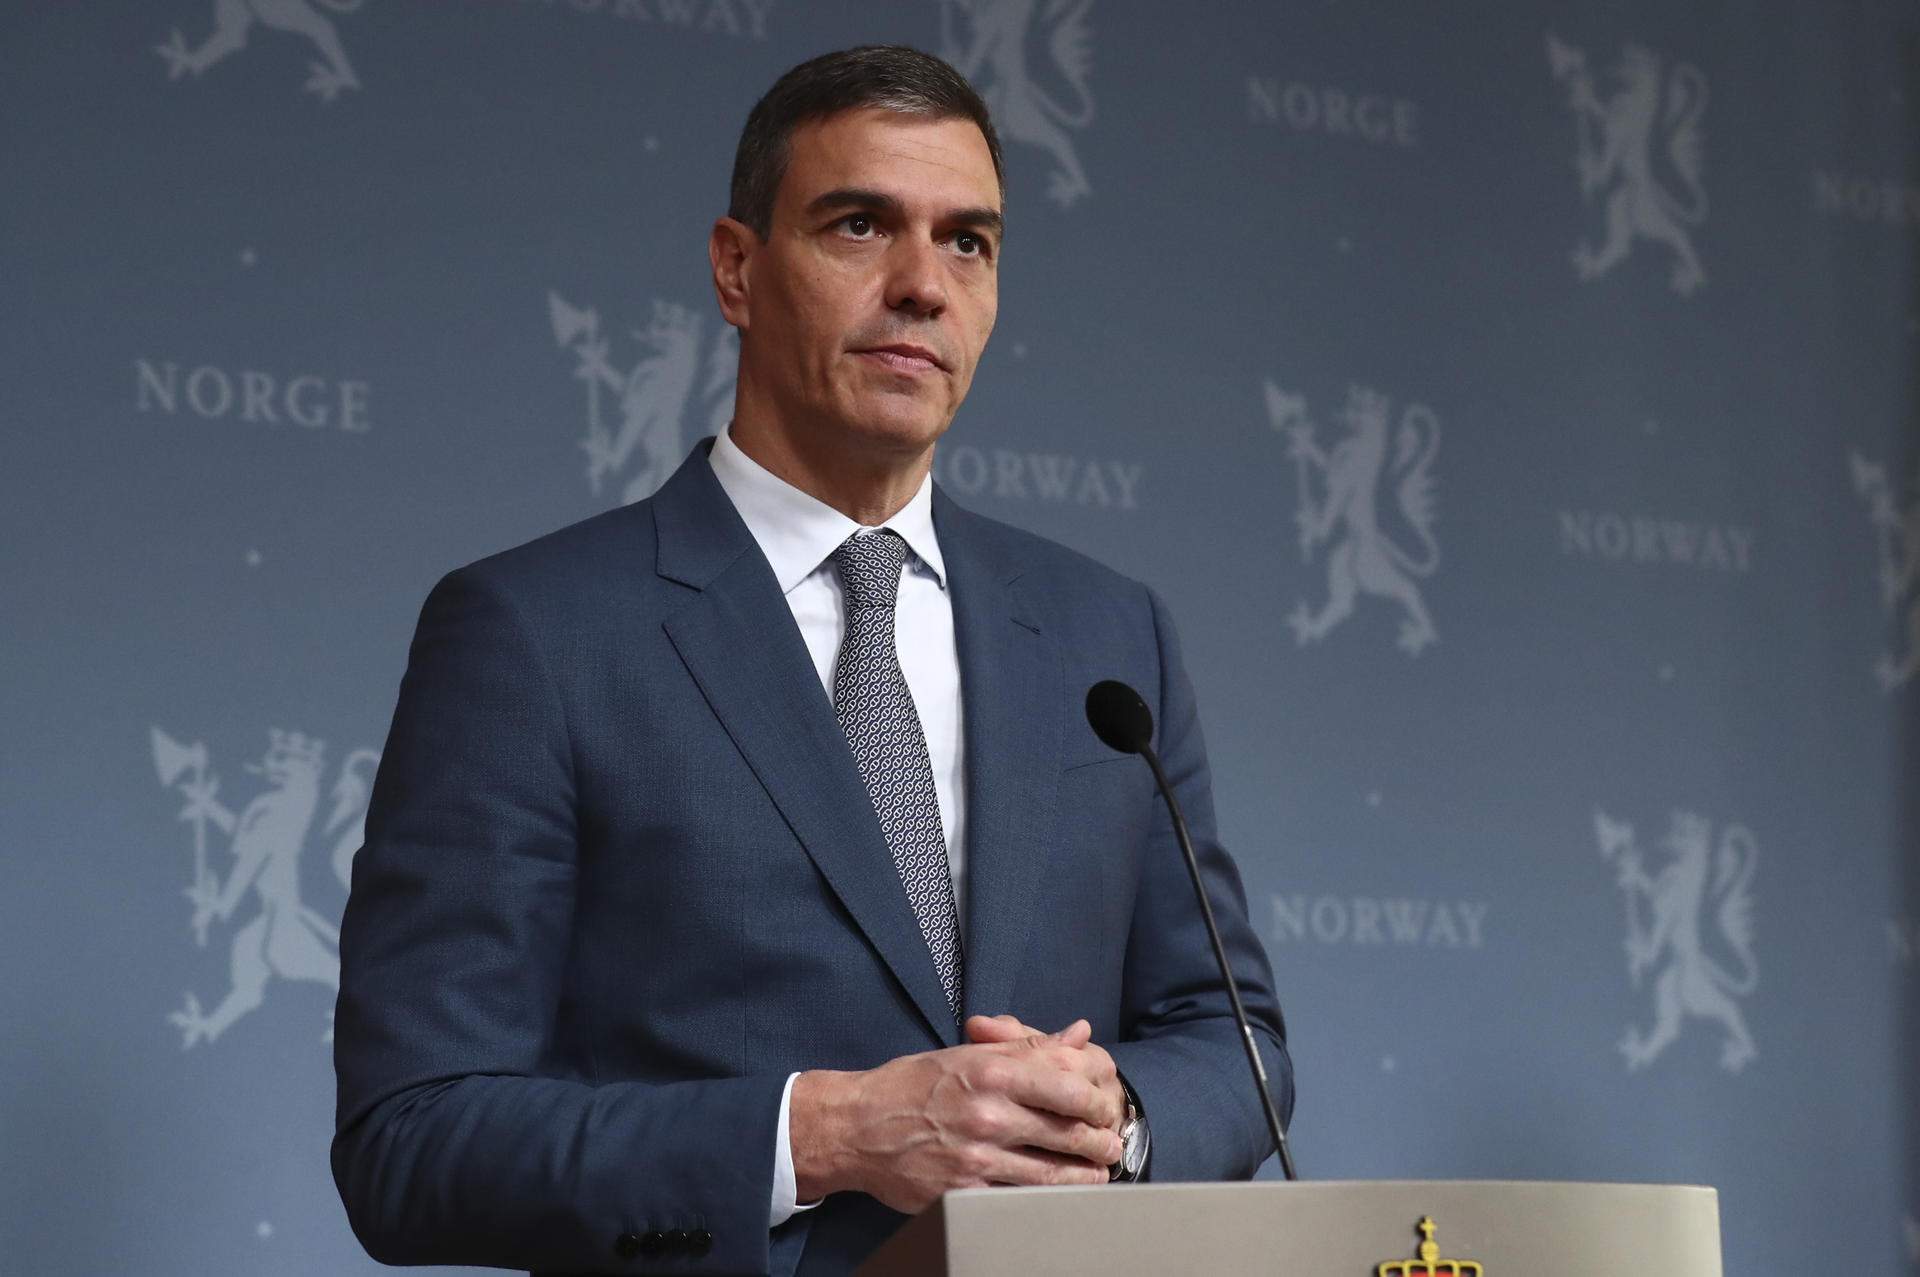 Spanish PM Pedro Sánchez says he may resign due to corruption claims against his wife